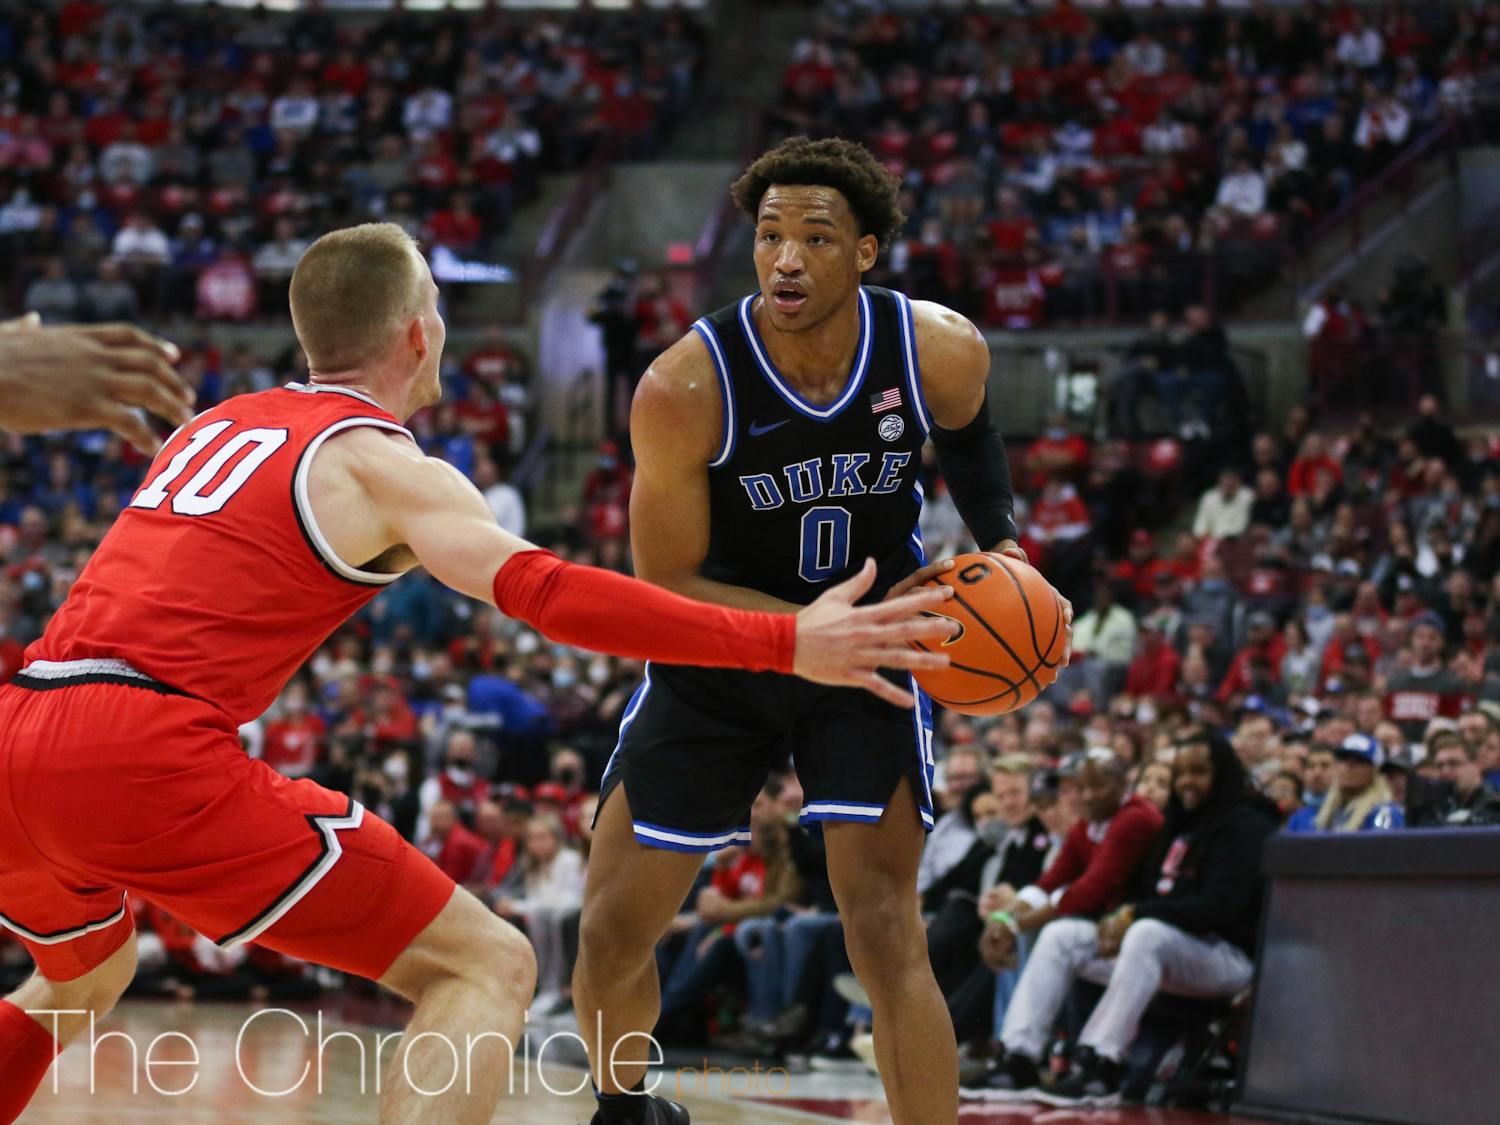 No. 1 Duke fell to Ohio State after shooting 38.5% from the field.